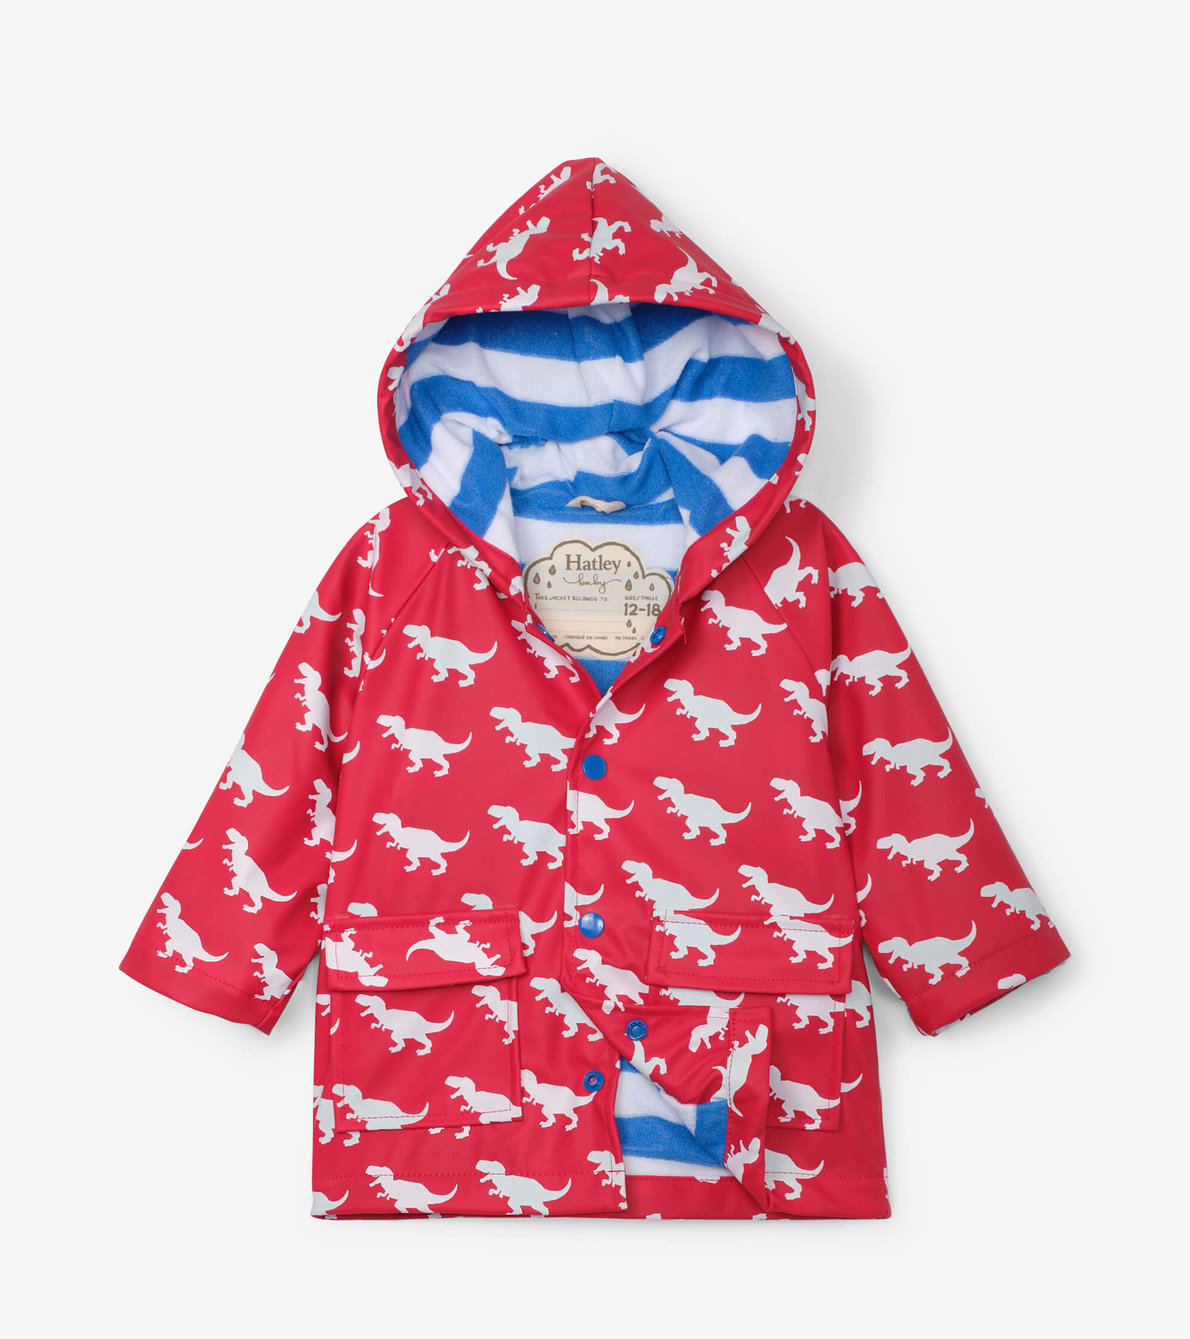 View larger image of T-Rex Silhouettes Colour Changing Baby Raincoat